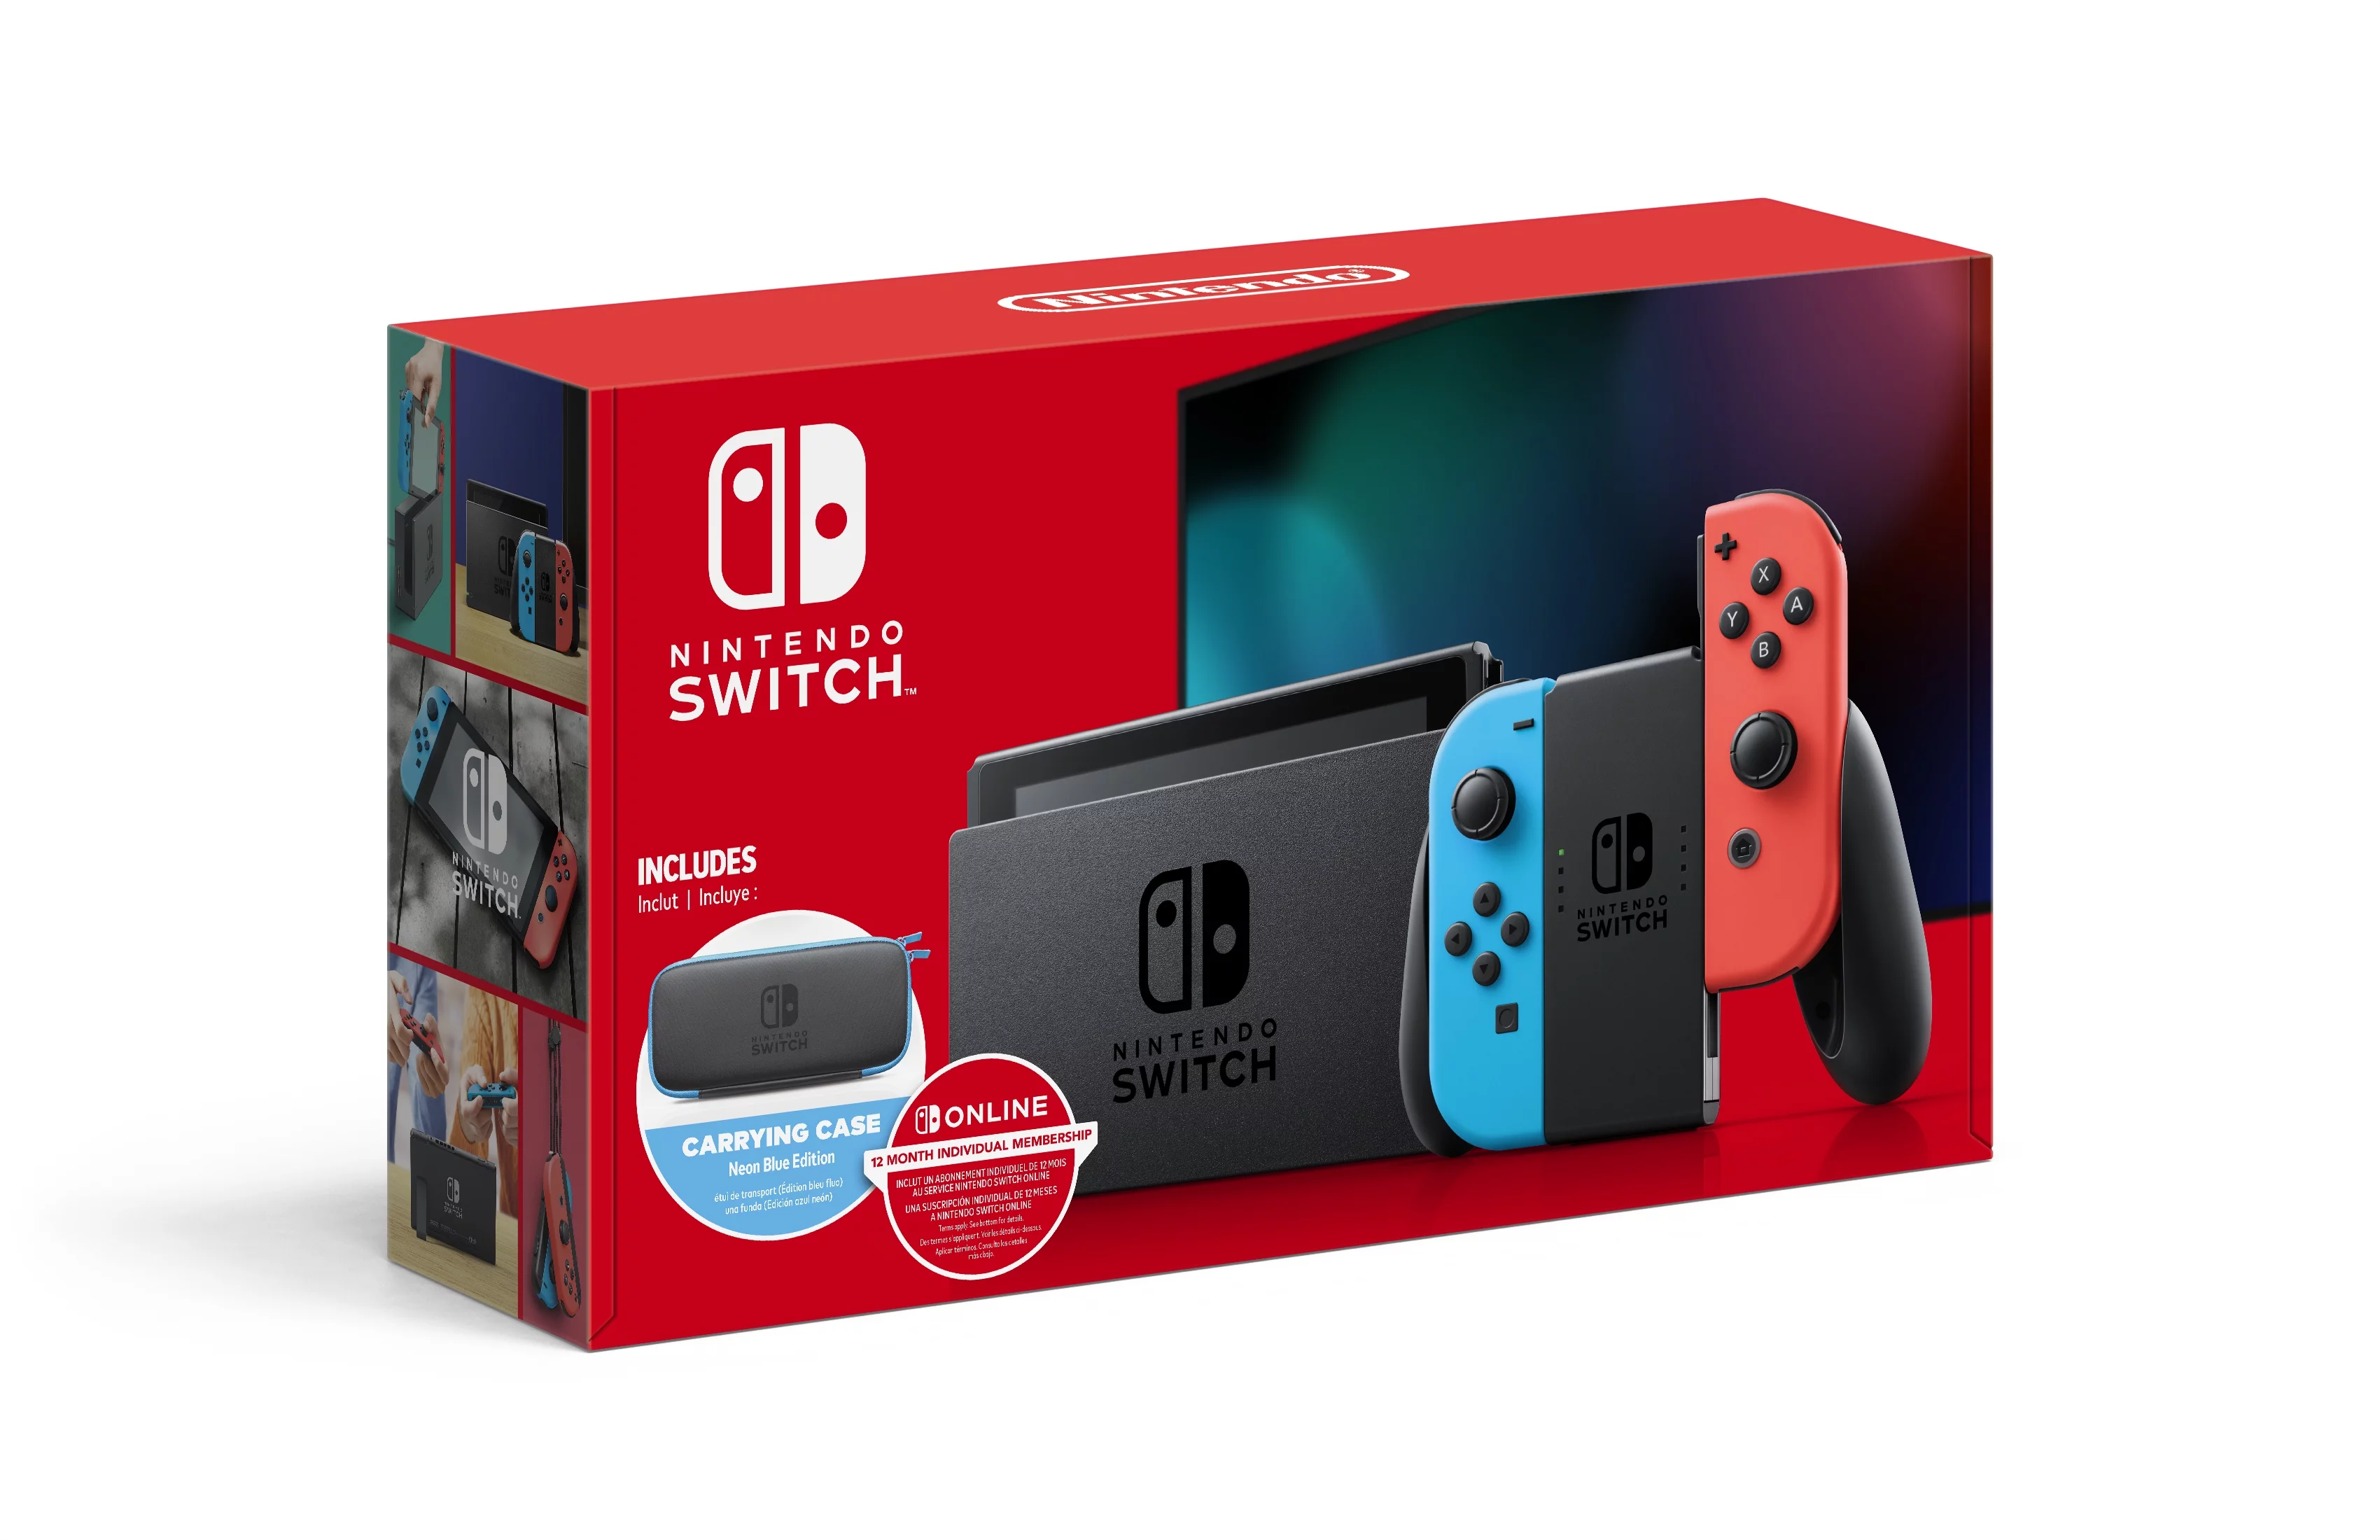 Nintendo Switch w/ Neon Blue & Neon Red Joy-Con + 12 Month Individual Membership Nintendo Switch Online + Carrying Case